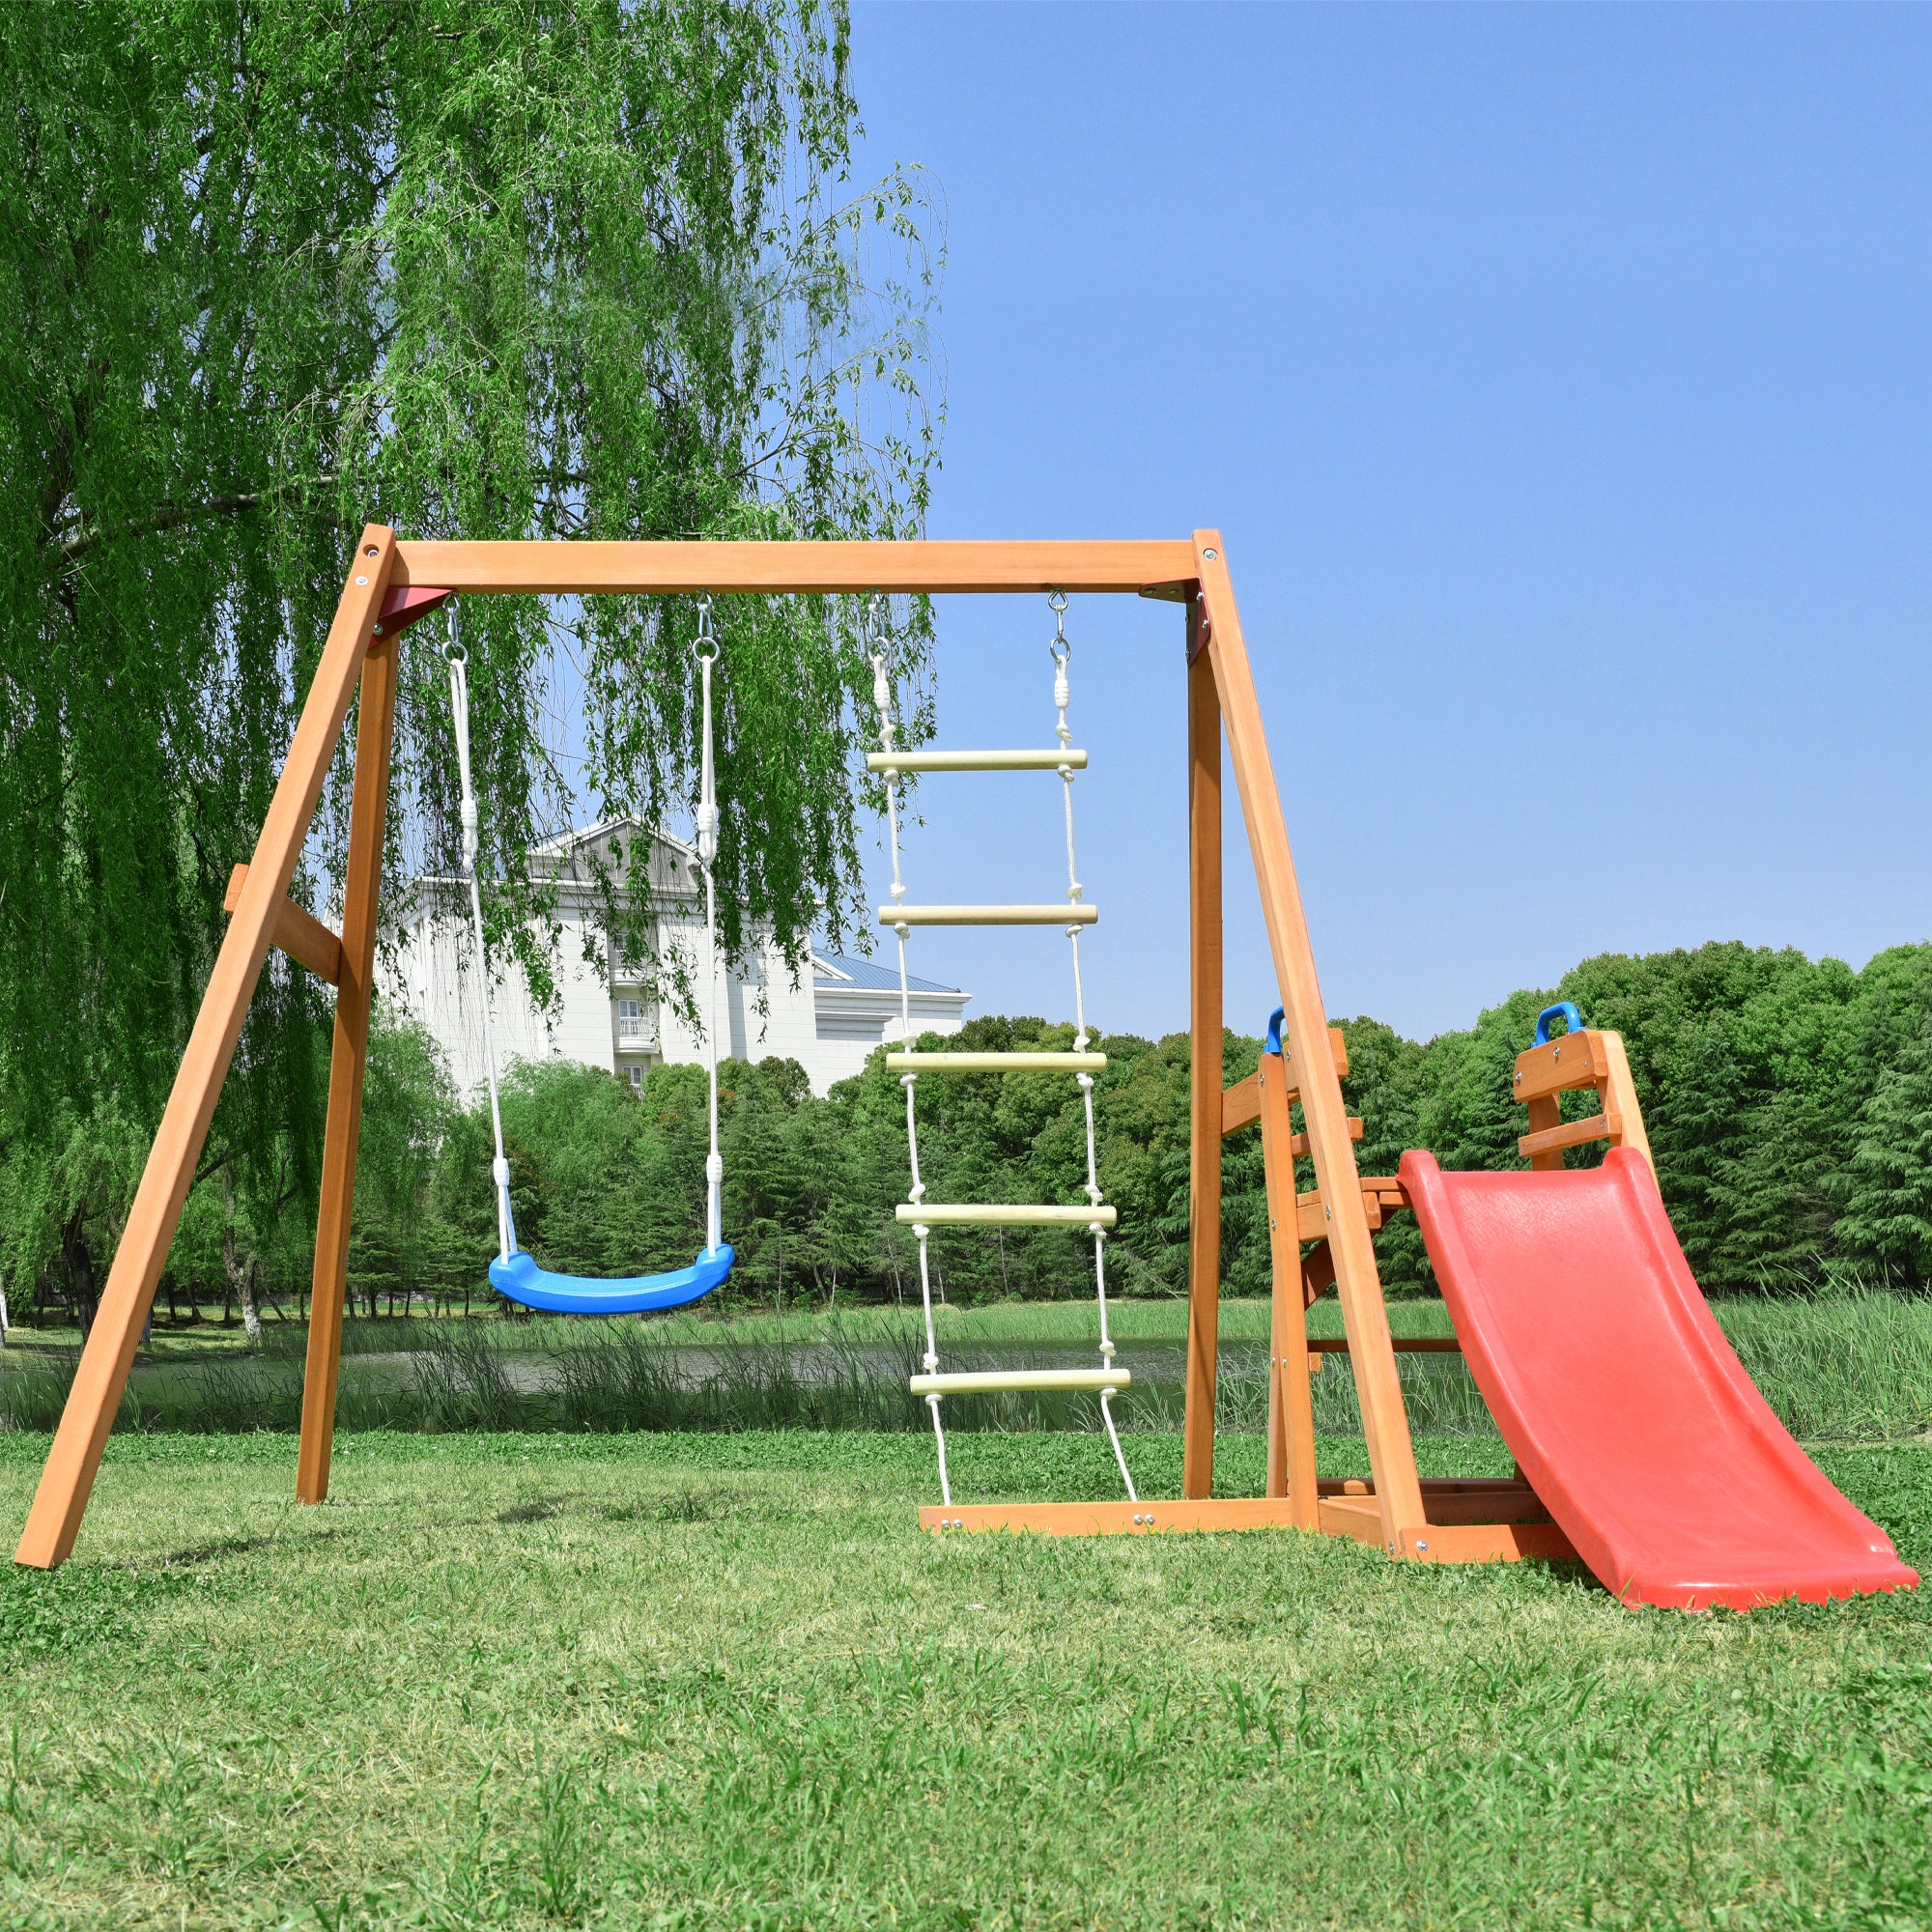 🆓🚛 Wooden Swing Set With Slide, Outdoor Playset Backyard Activity Playground Climb Swing Outdoor Play Structure for Toddlers, Ready To Assemble Wooden Swing-N-Slide Set Kids Climbers